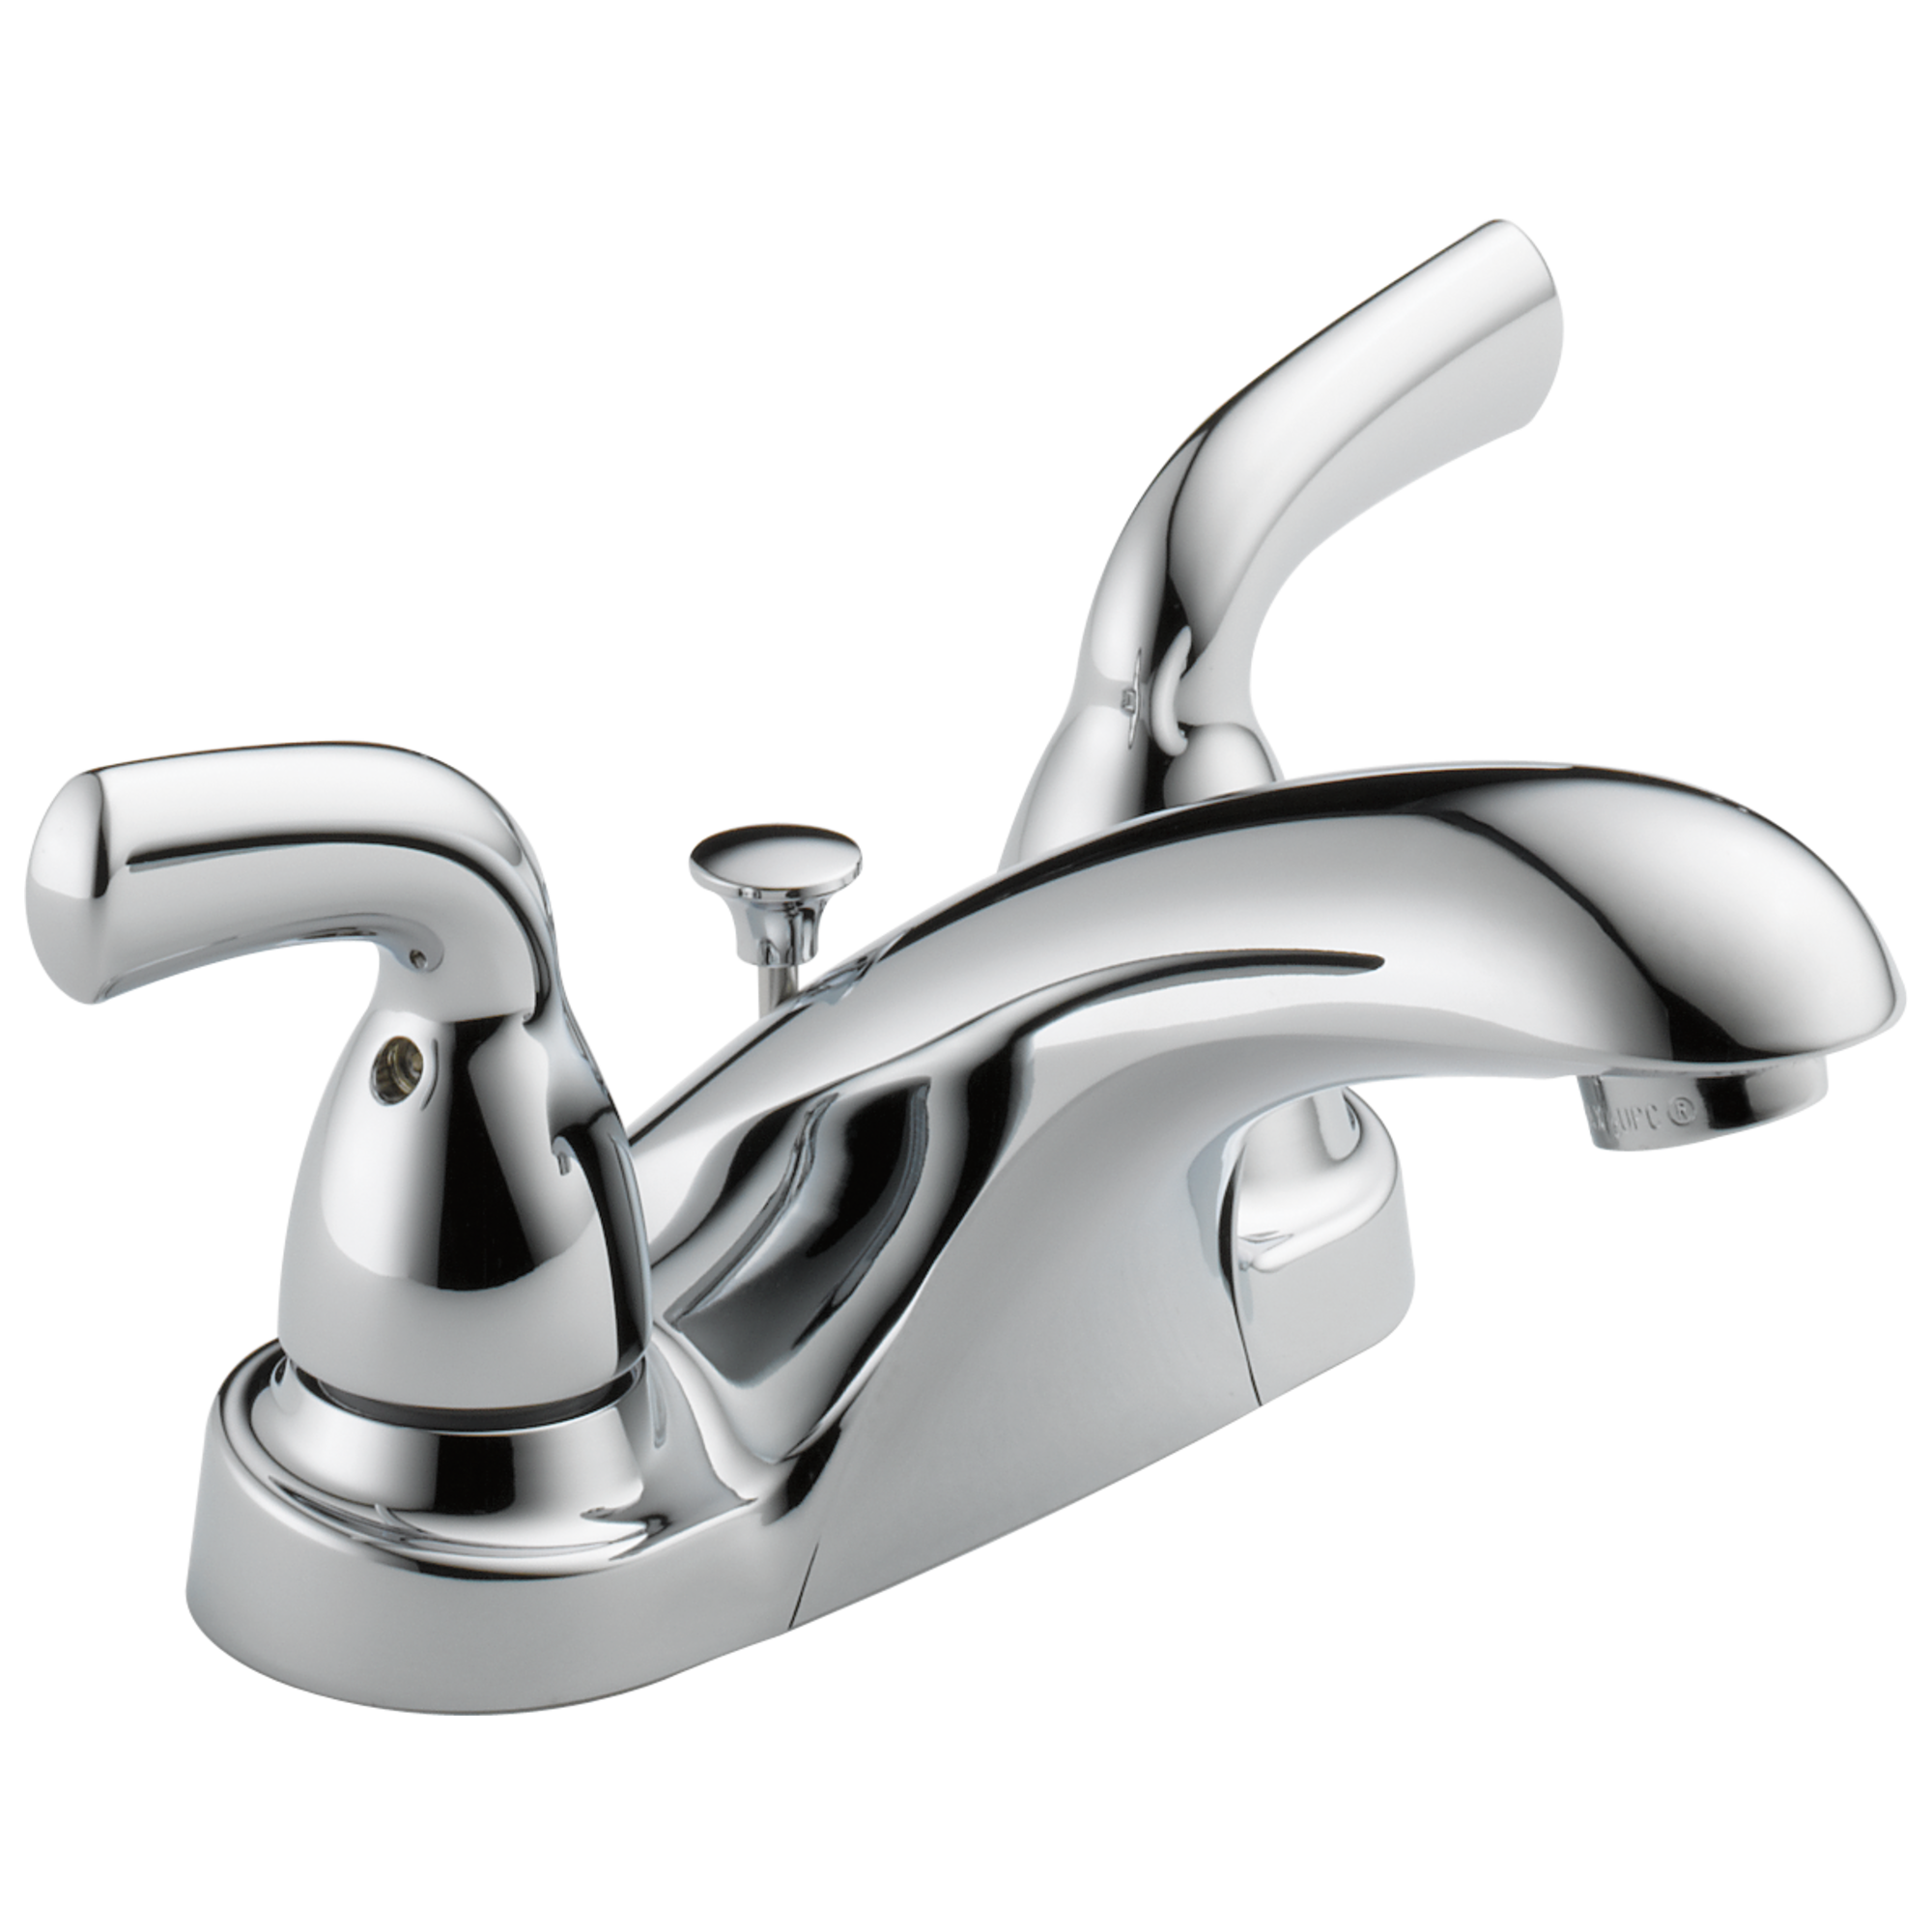 Centerset 2-Handle Bathroom Faucet in Chrome by Delta Classic 4 in